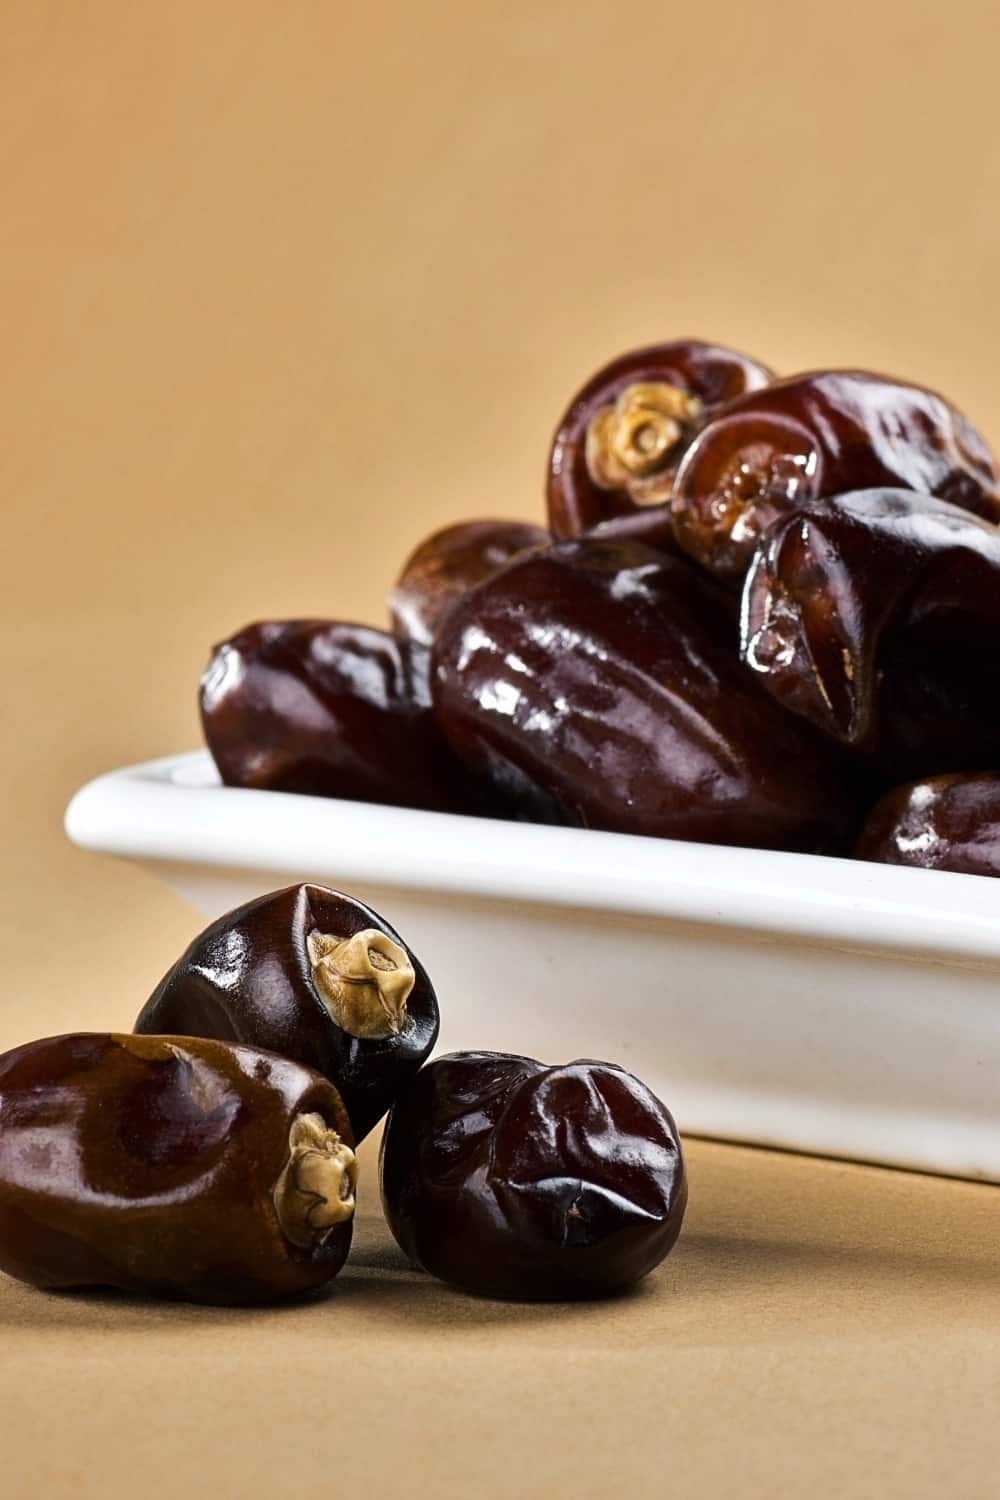 dates in white plate